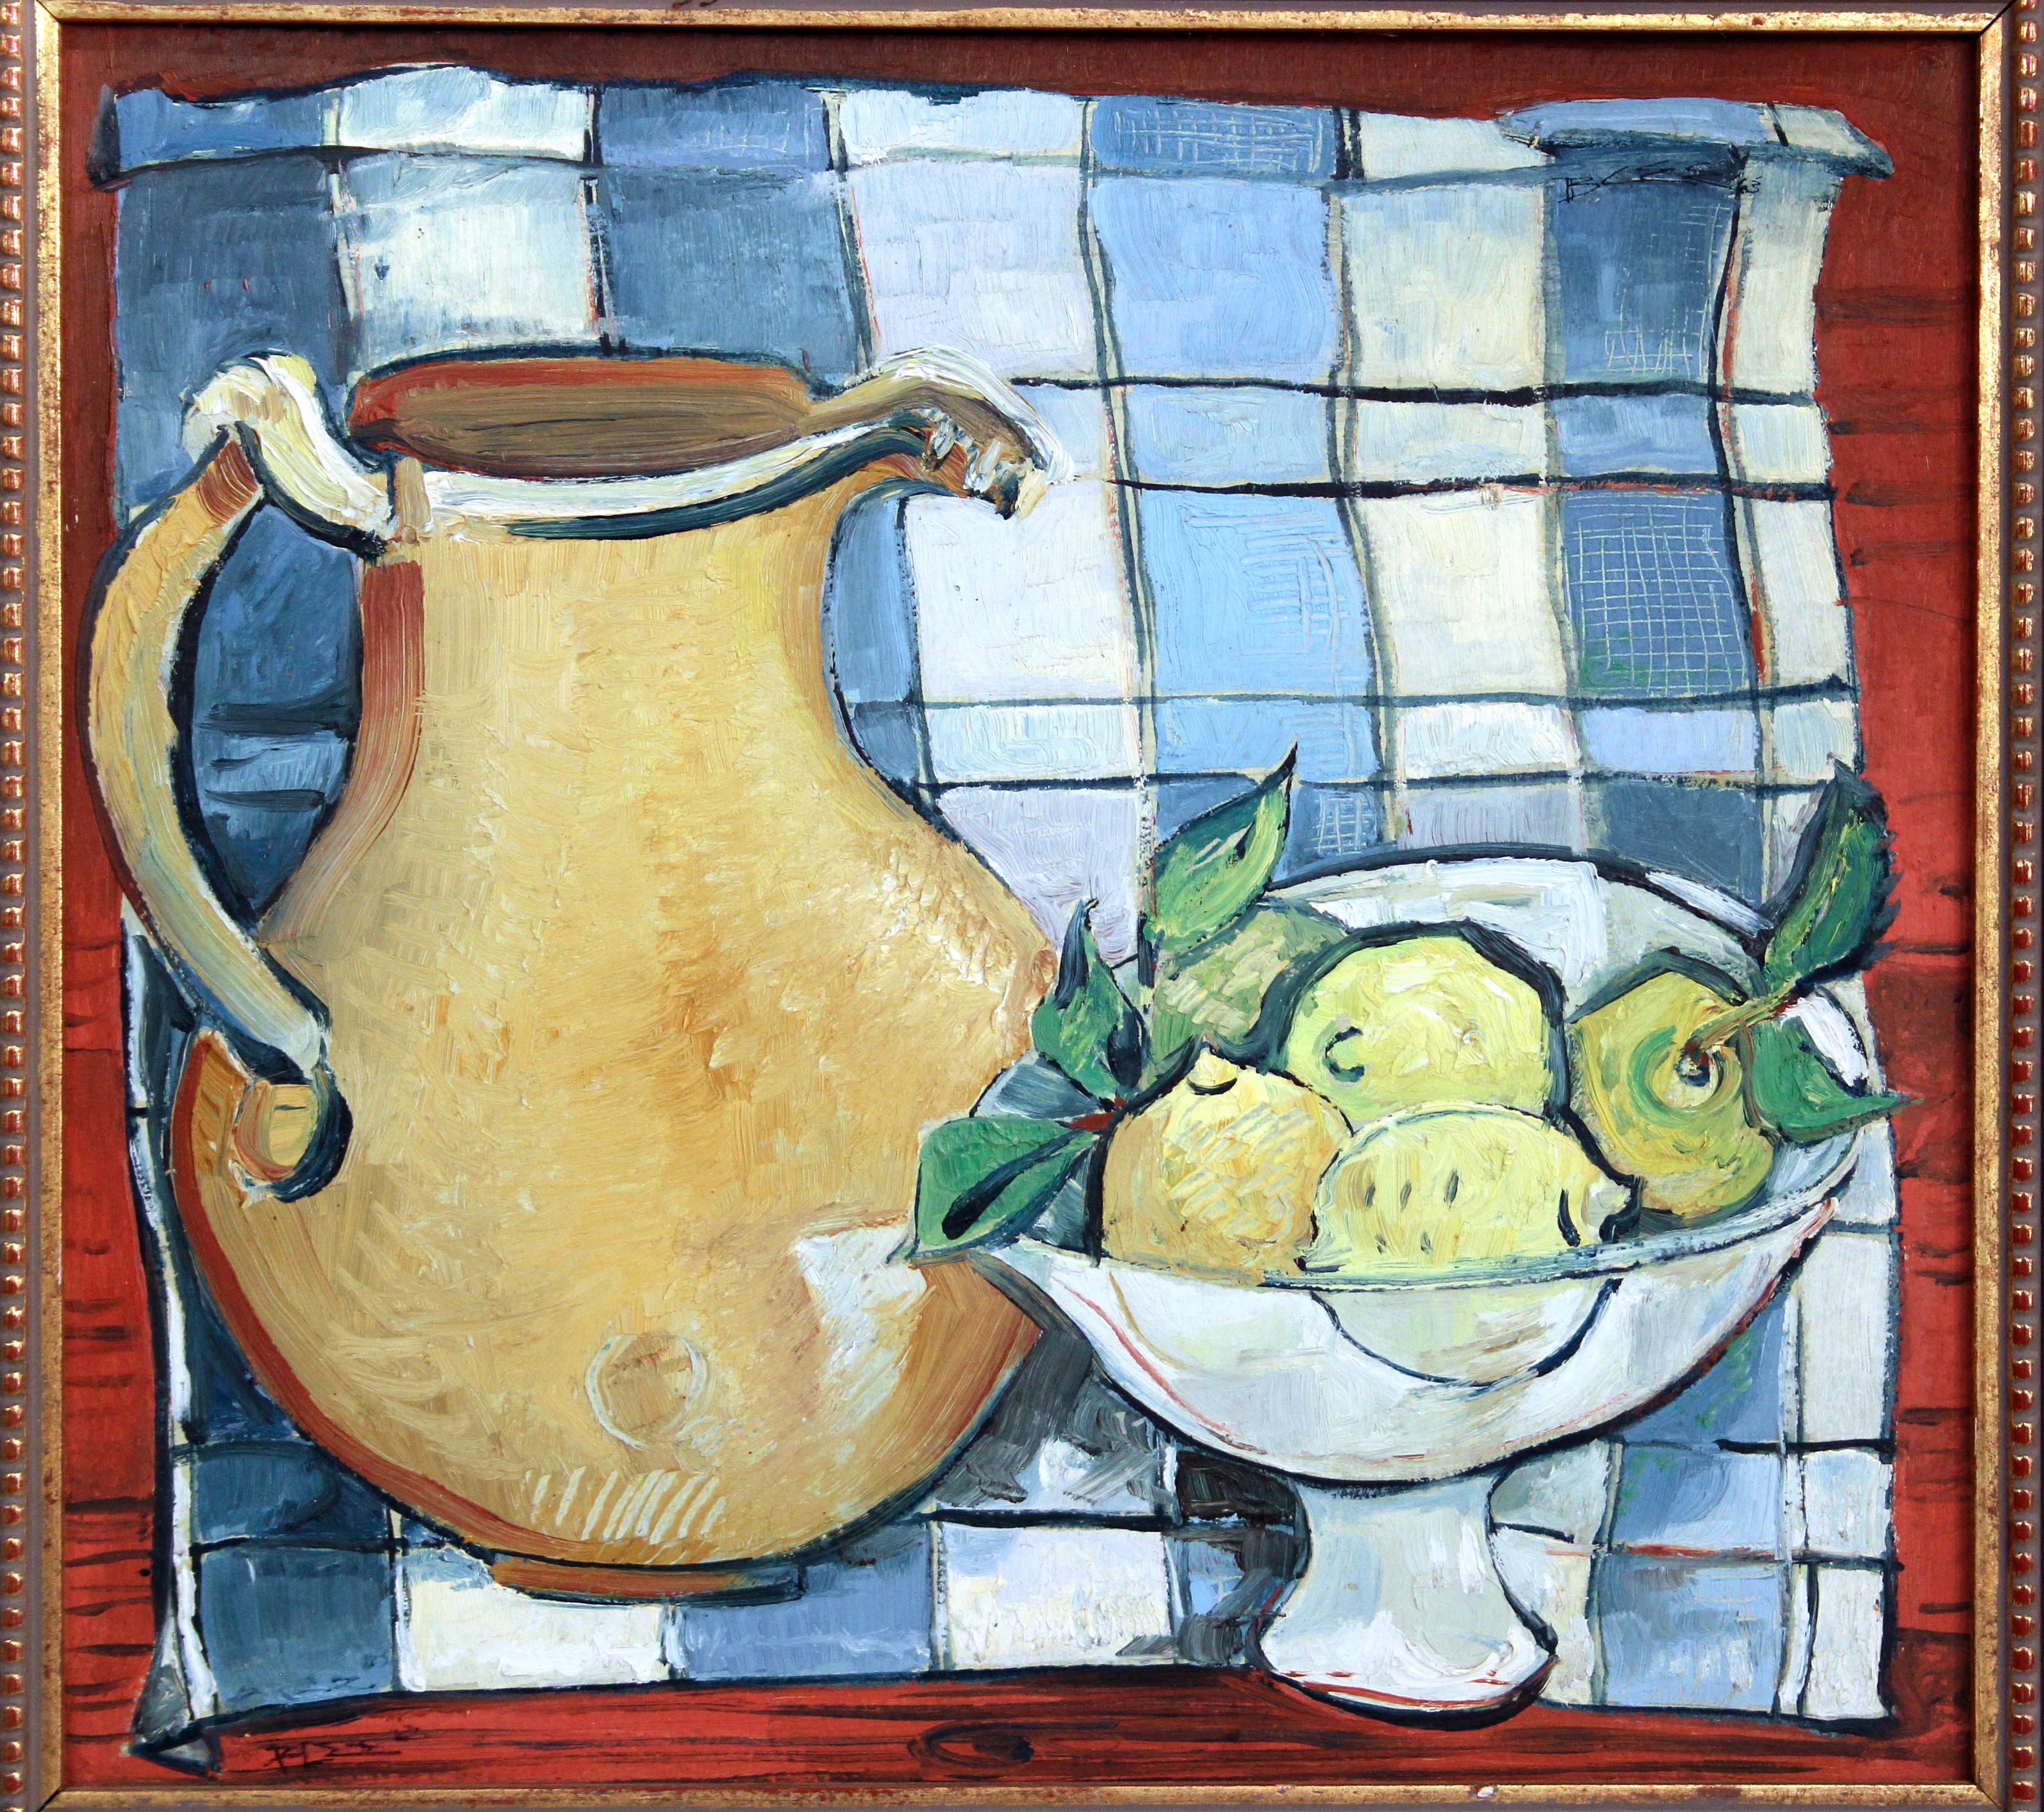 Vintage still life oil painting on board depicting a pitcher and a bowl of lemons on a checkered towel. Nicely done in confident technique with balanced composition, good color, and strong contrasts. Nice quality, attractive gilt wood frame.